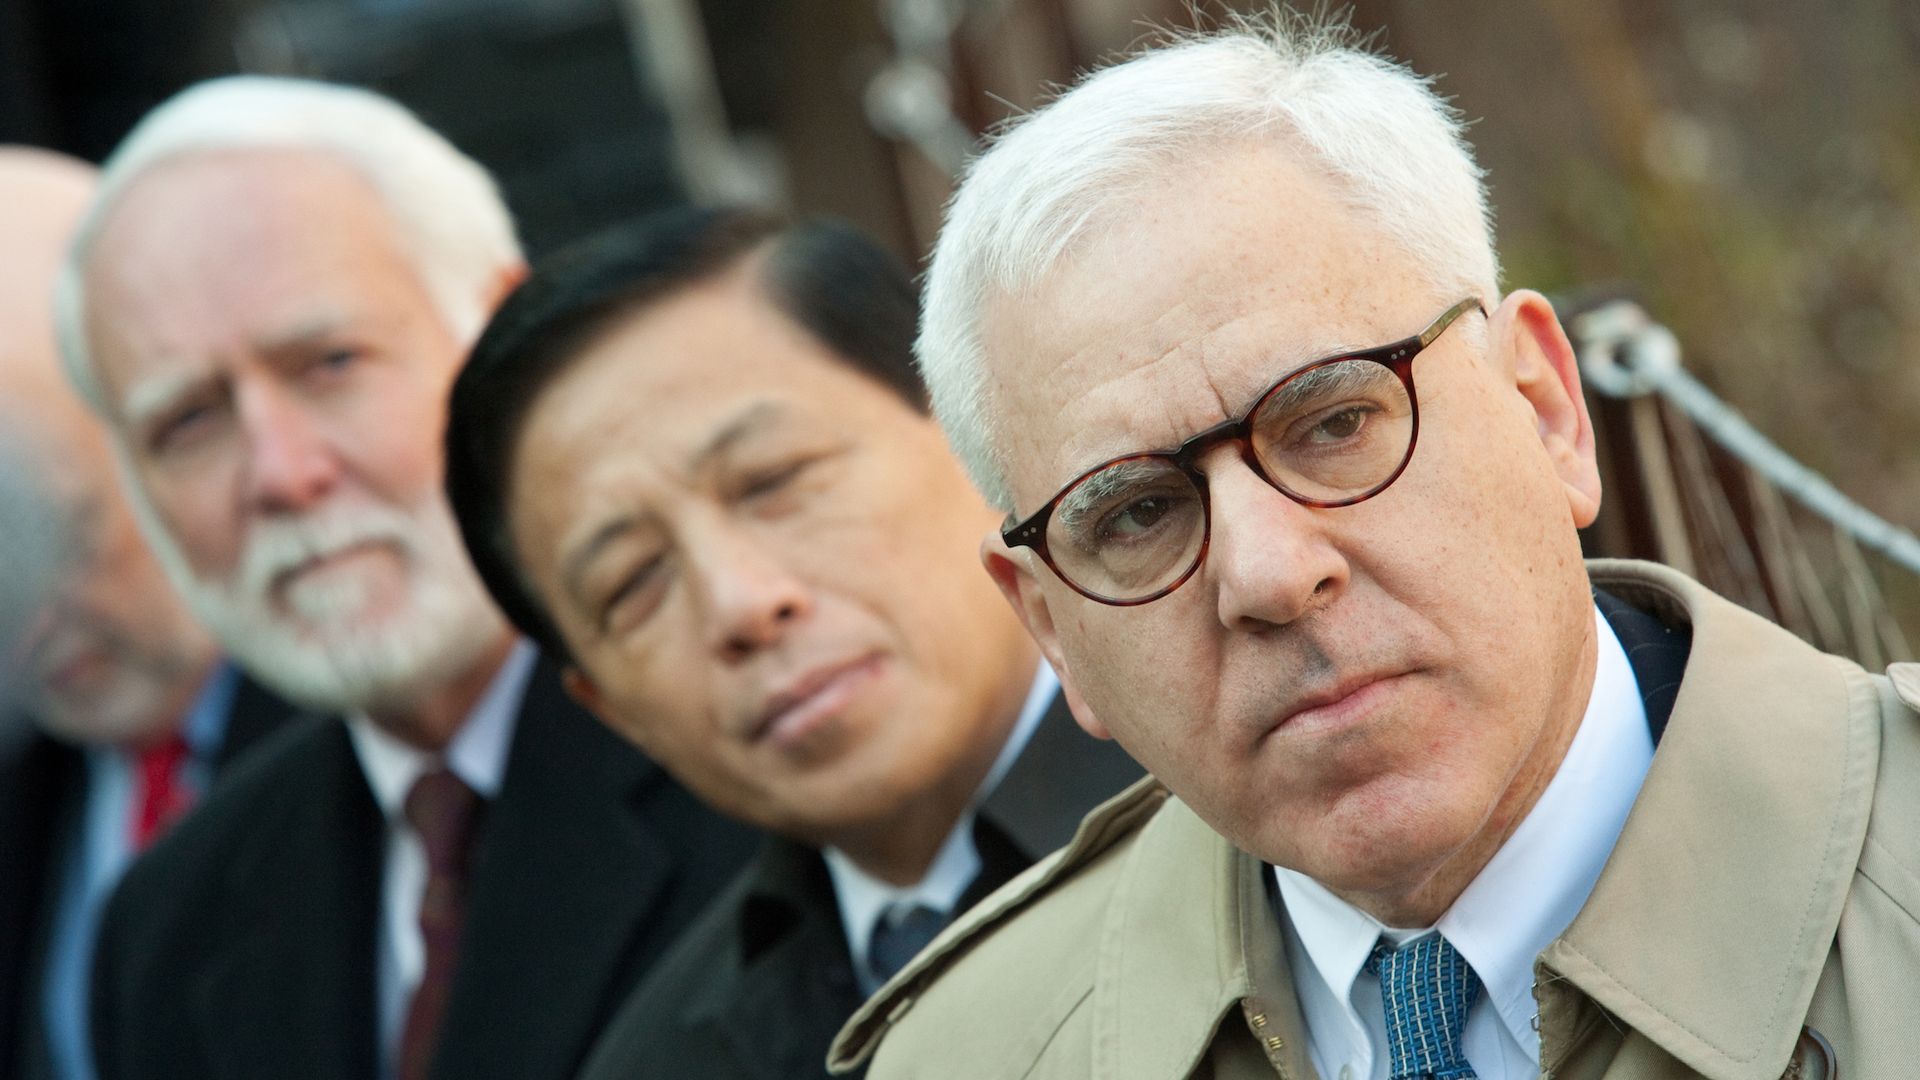  Wayne Clough (far left), secretary of the Smithsonian Institution, Ambassador Zhang Yesui, of the People's Republic of China, and David Rubenstein